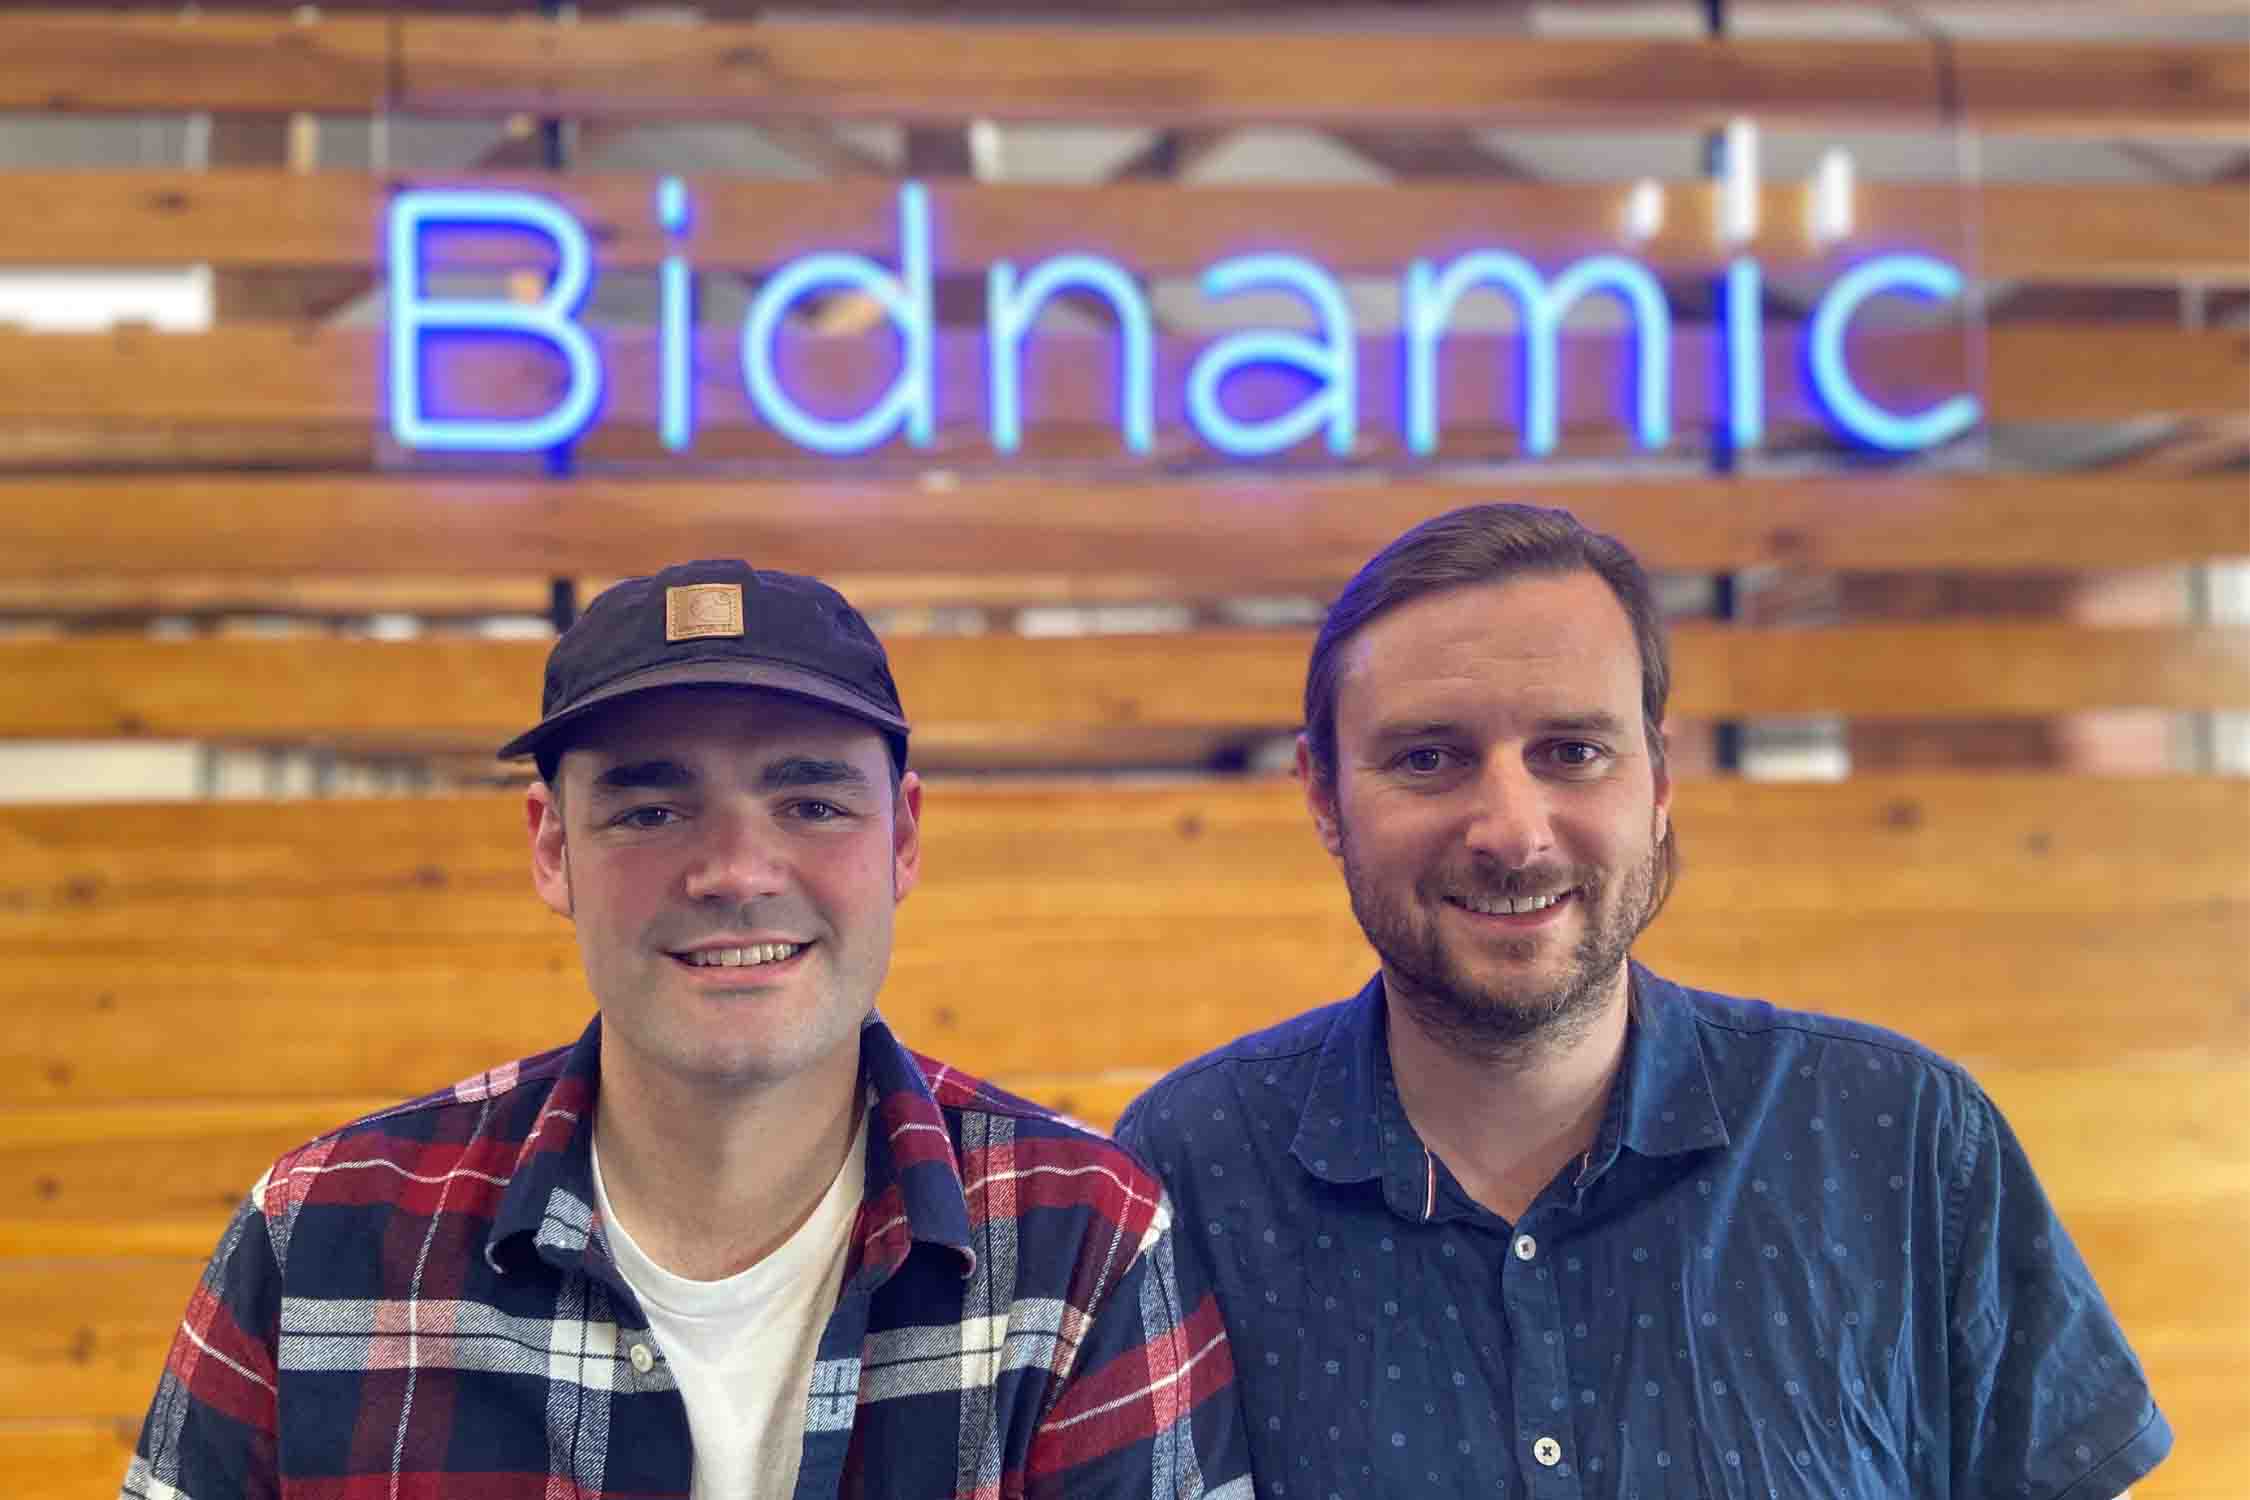 Bidnamic secures £4m Series A funding from Gresham House Ventures